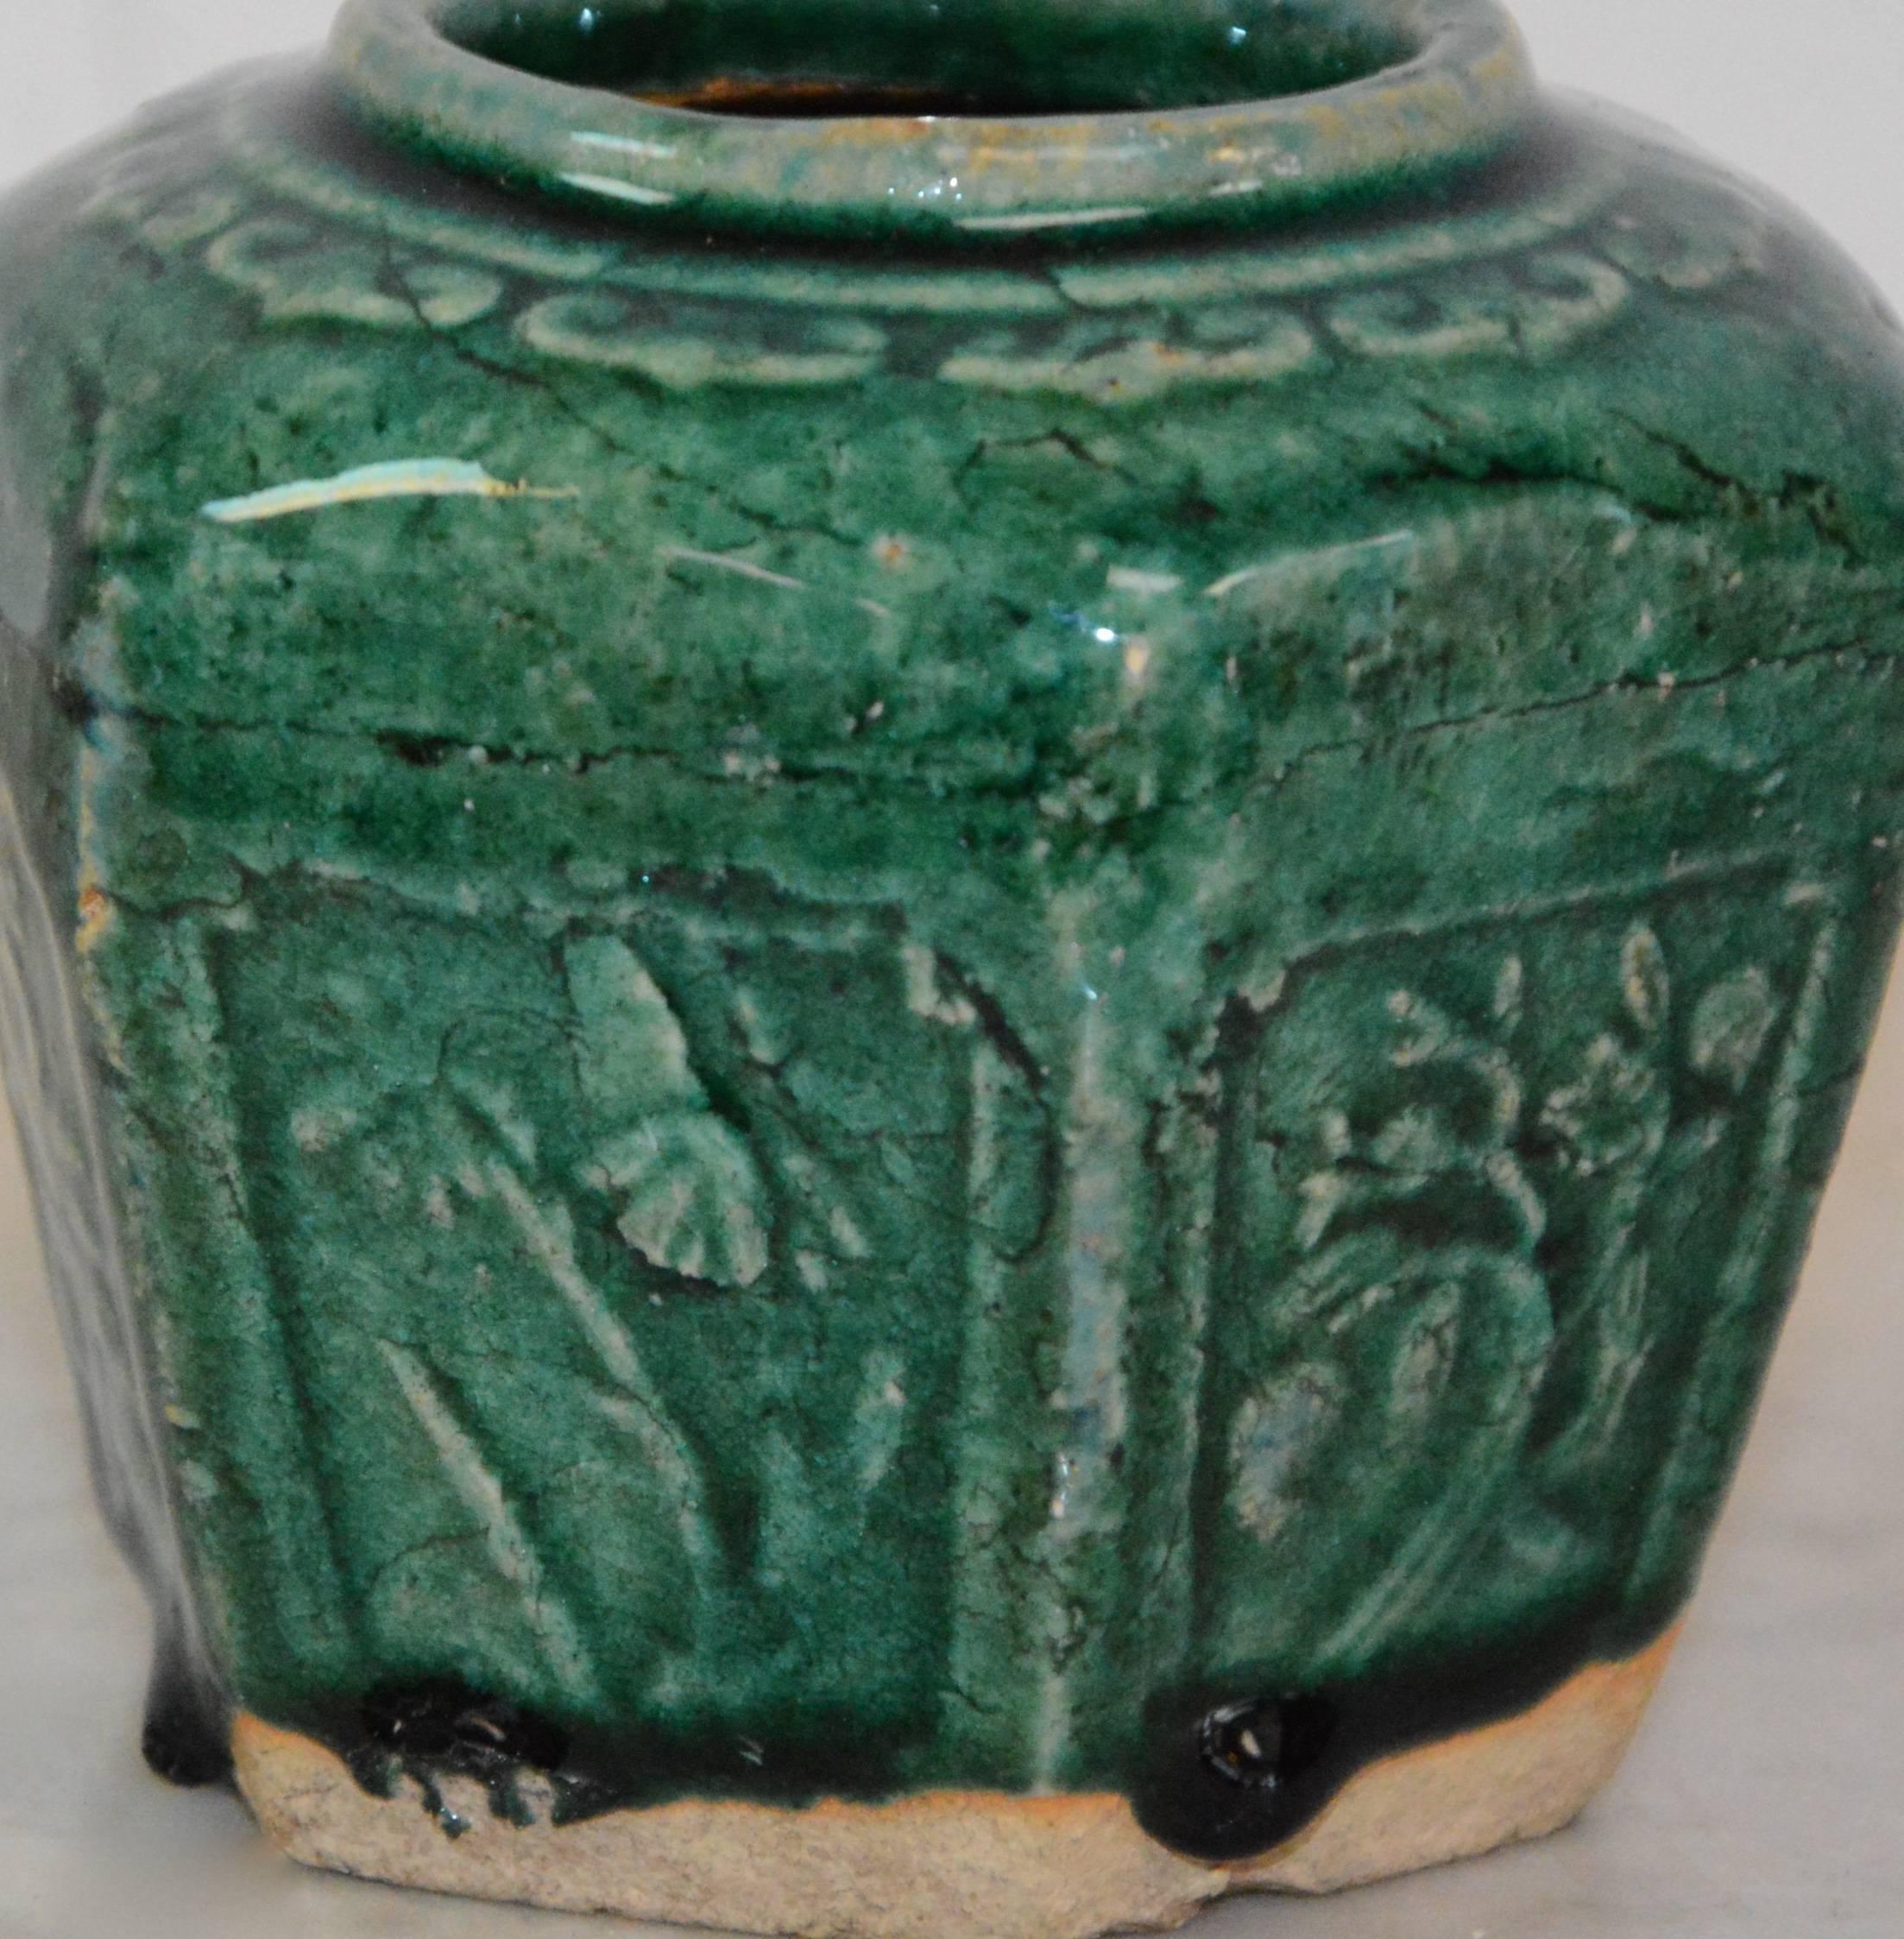 Featured is an antique Qing dynasty (1644-1911) ceramic wine vessel. This Chinese jar presents a round, faceted form with floral decorations in carved relief to each side and a decorative pattern encircling the mouth. It is glazed in jade green with